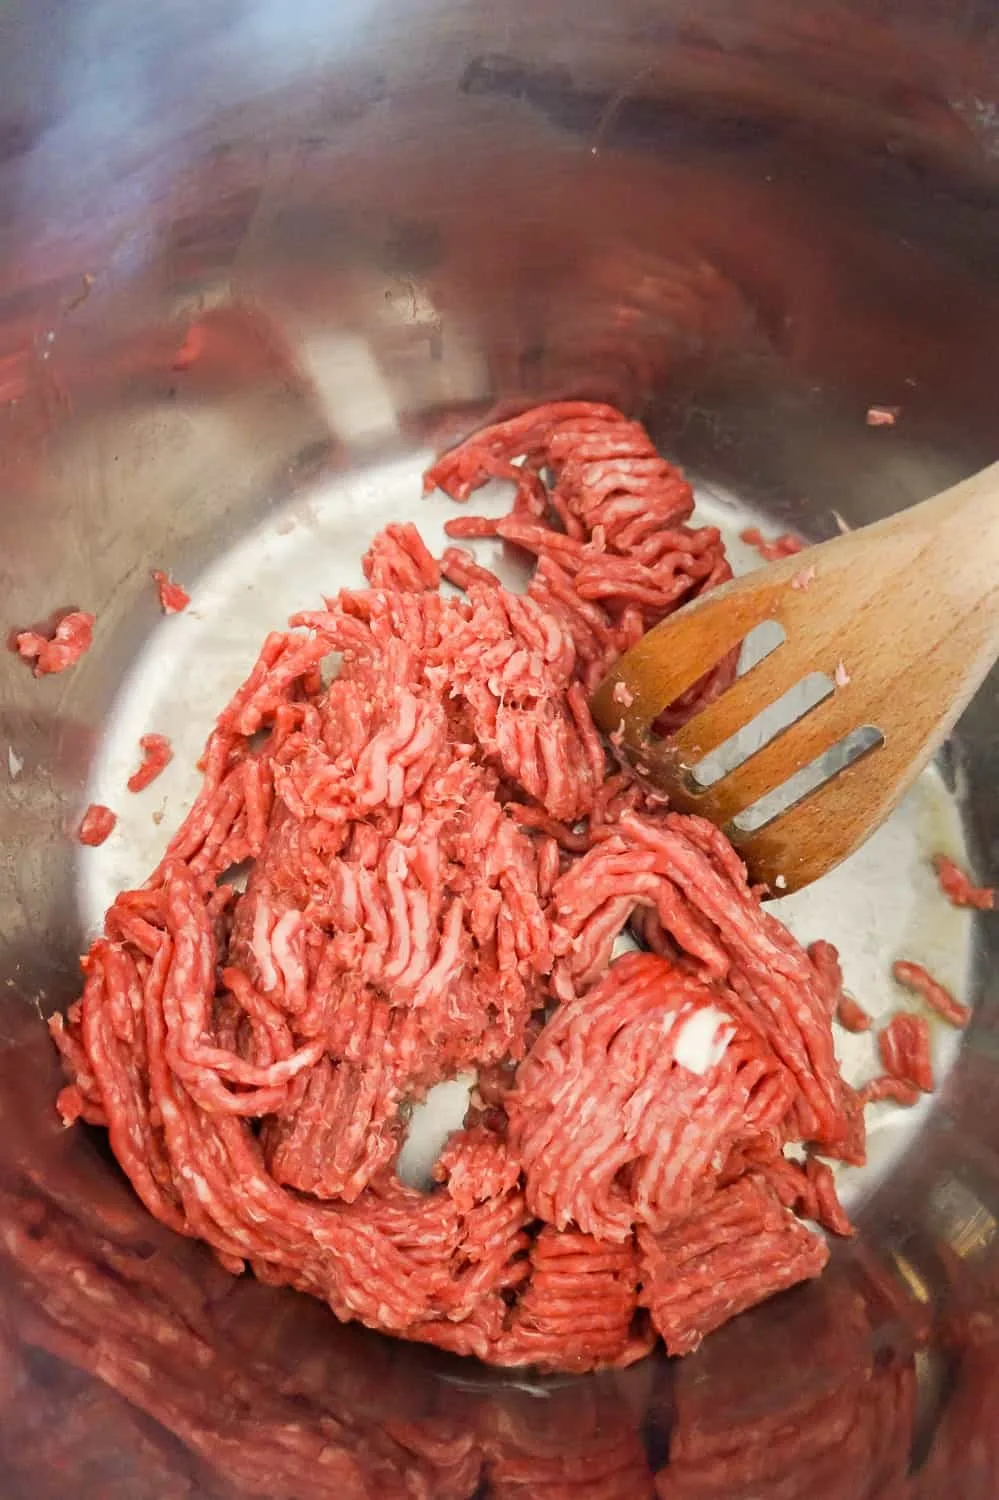 uncooked ground beef in an Instant Pot